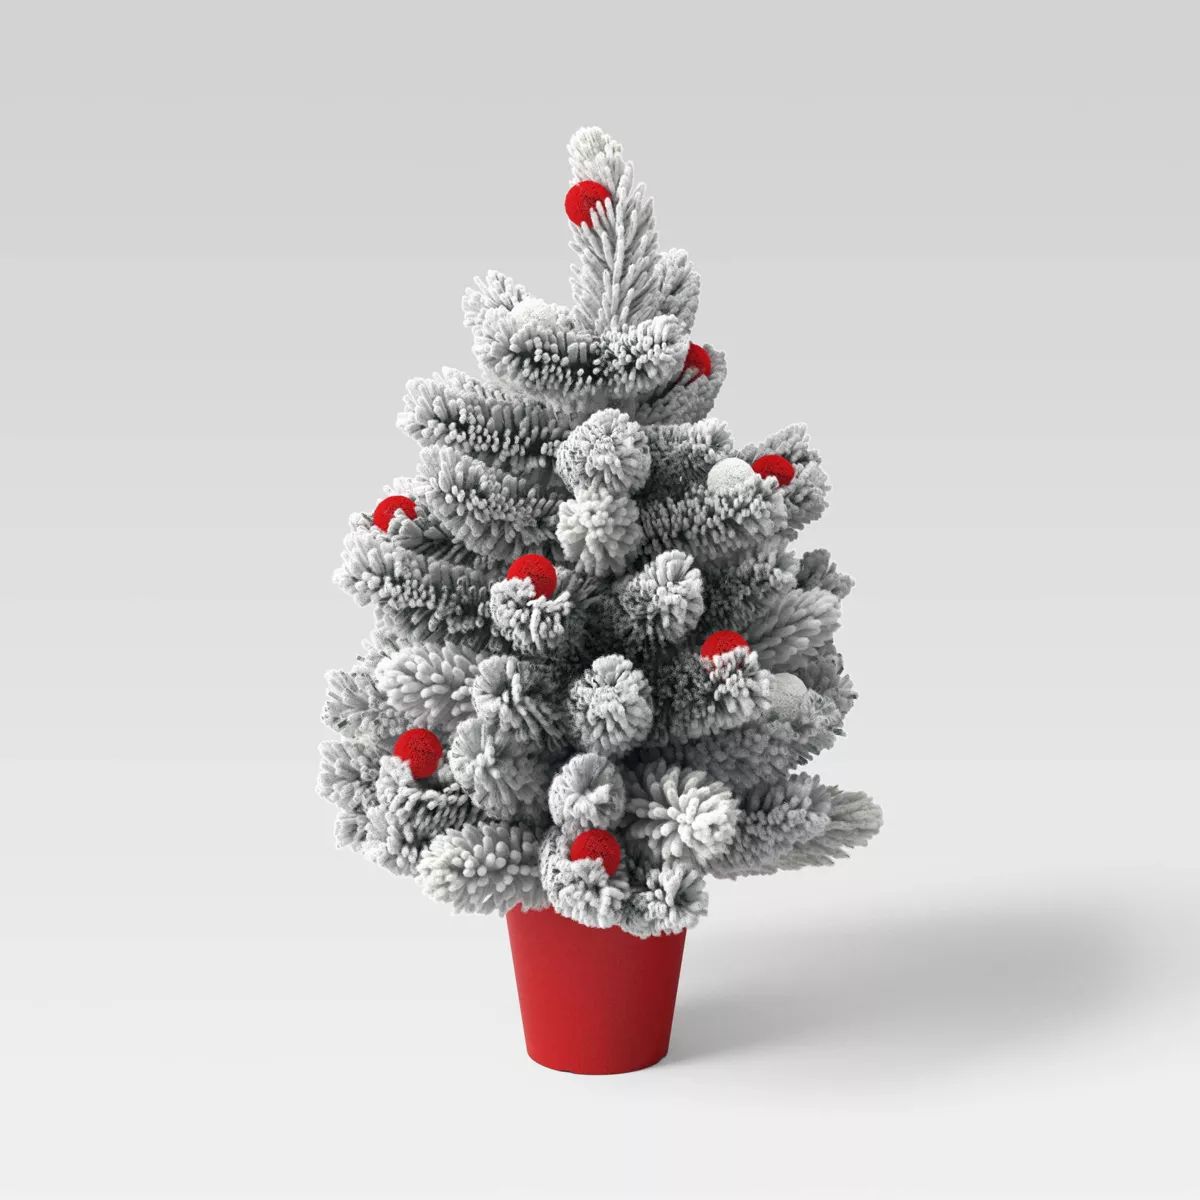 18" Flocked Potted Artificial Mini Christmas Tree with Pom Poms Red/White - Wondershop™ | Target